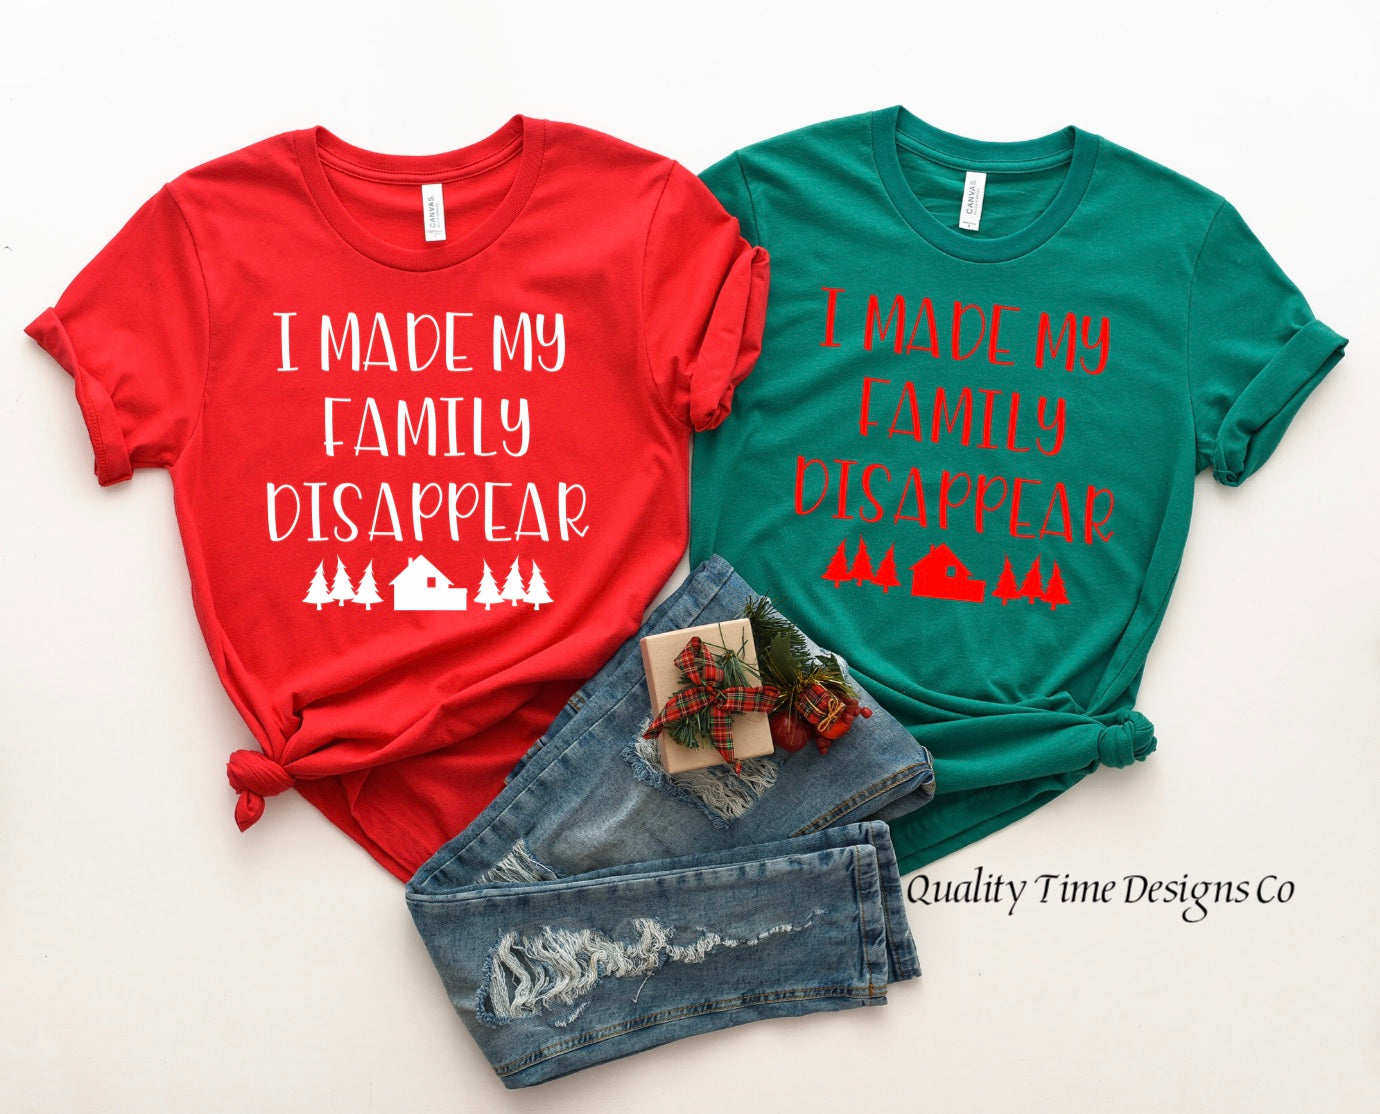 I made my family disappear t-shirt 